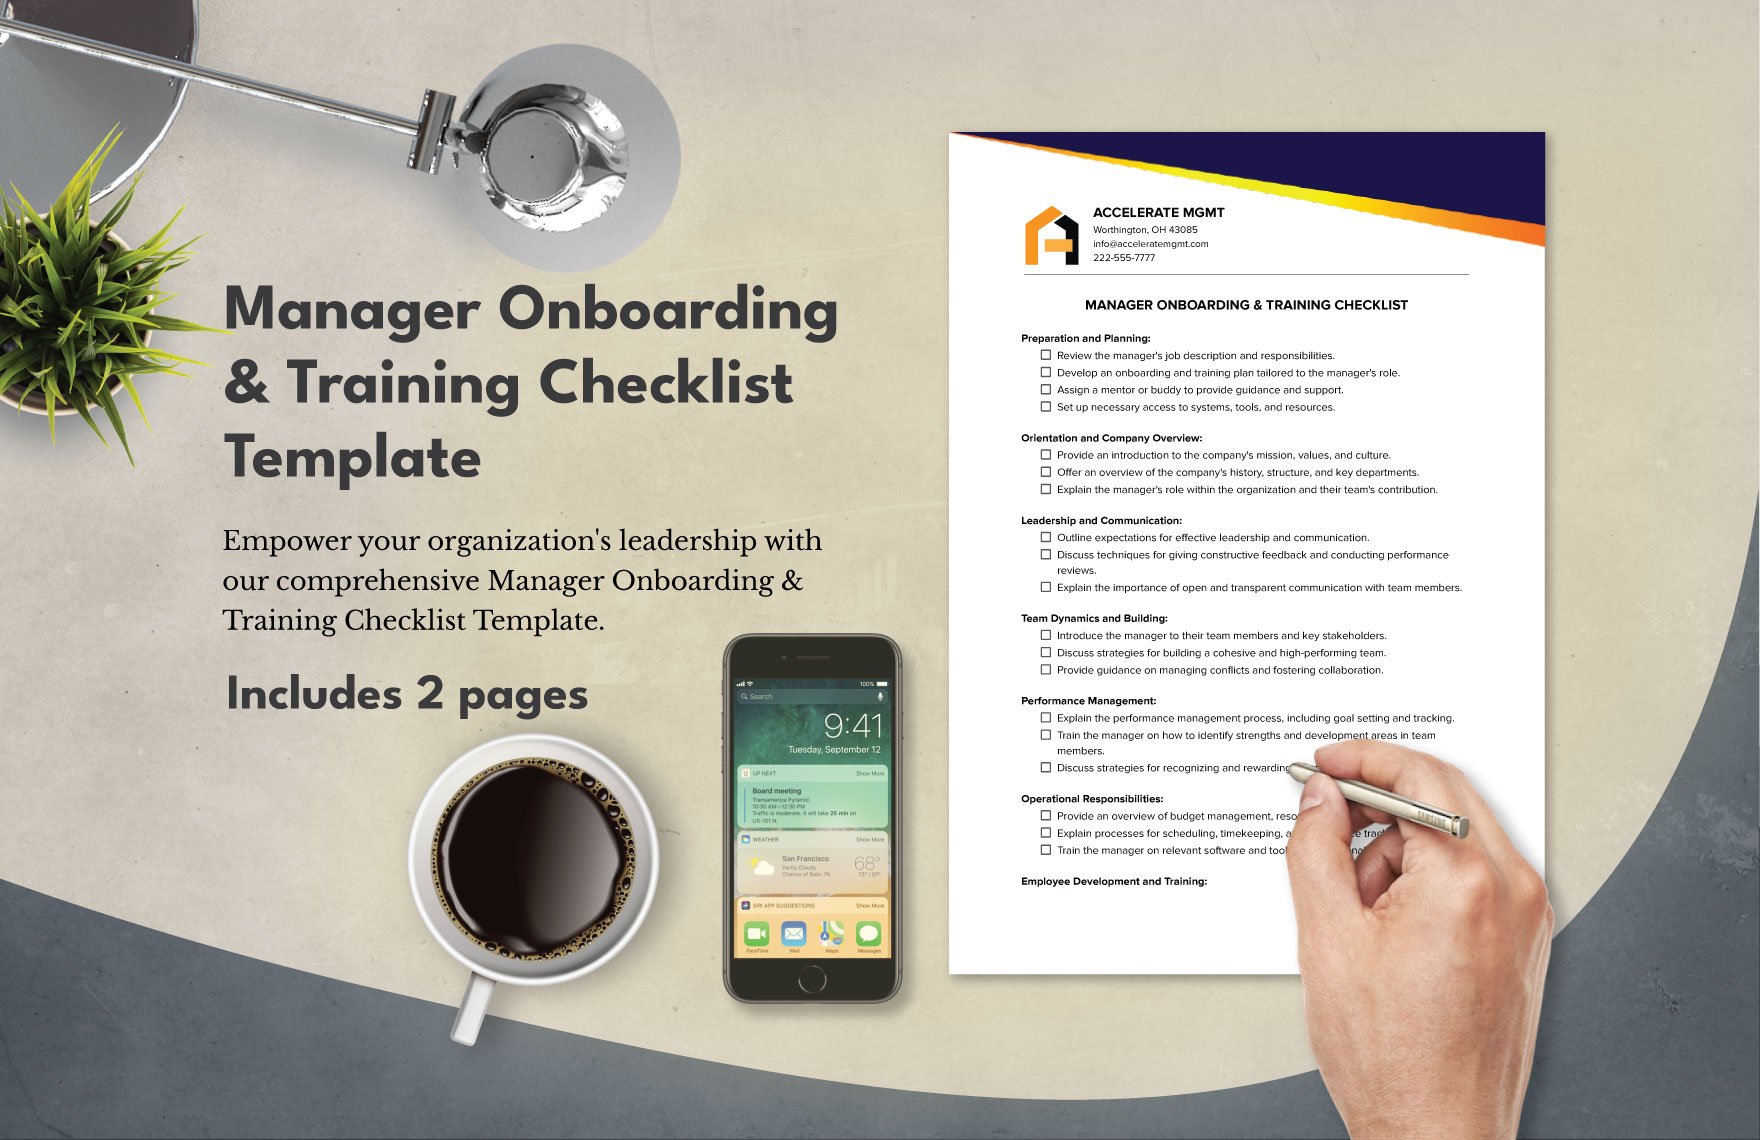 Manager Onboarding & Training Checklist Template